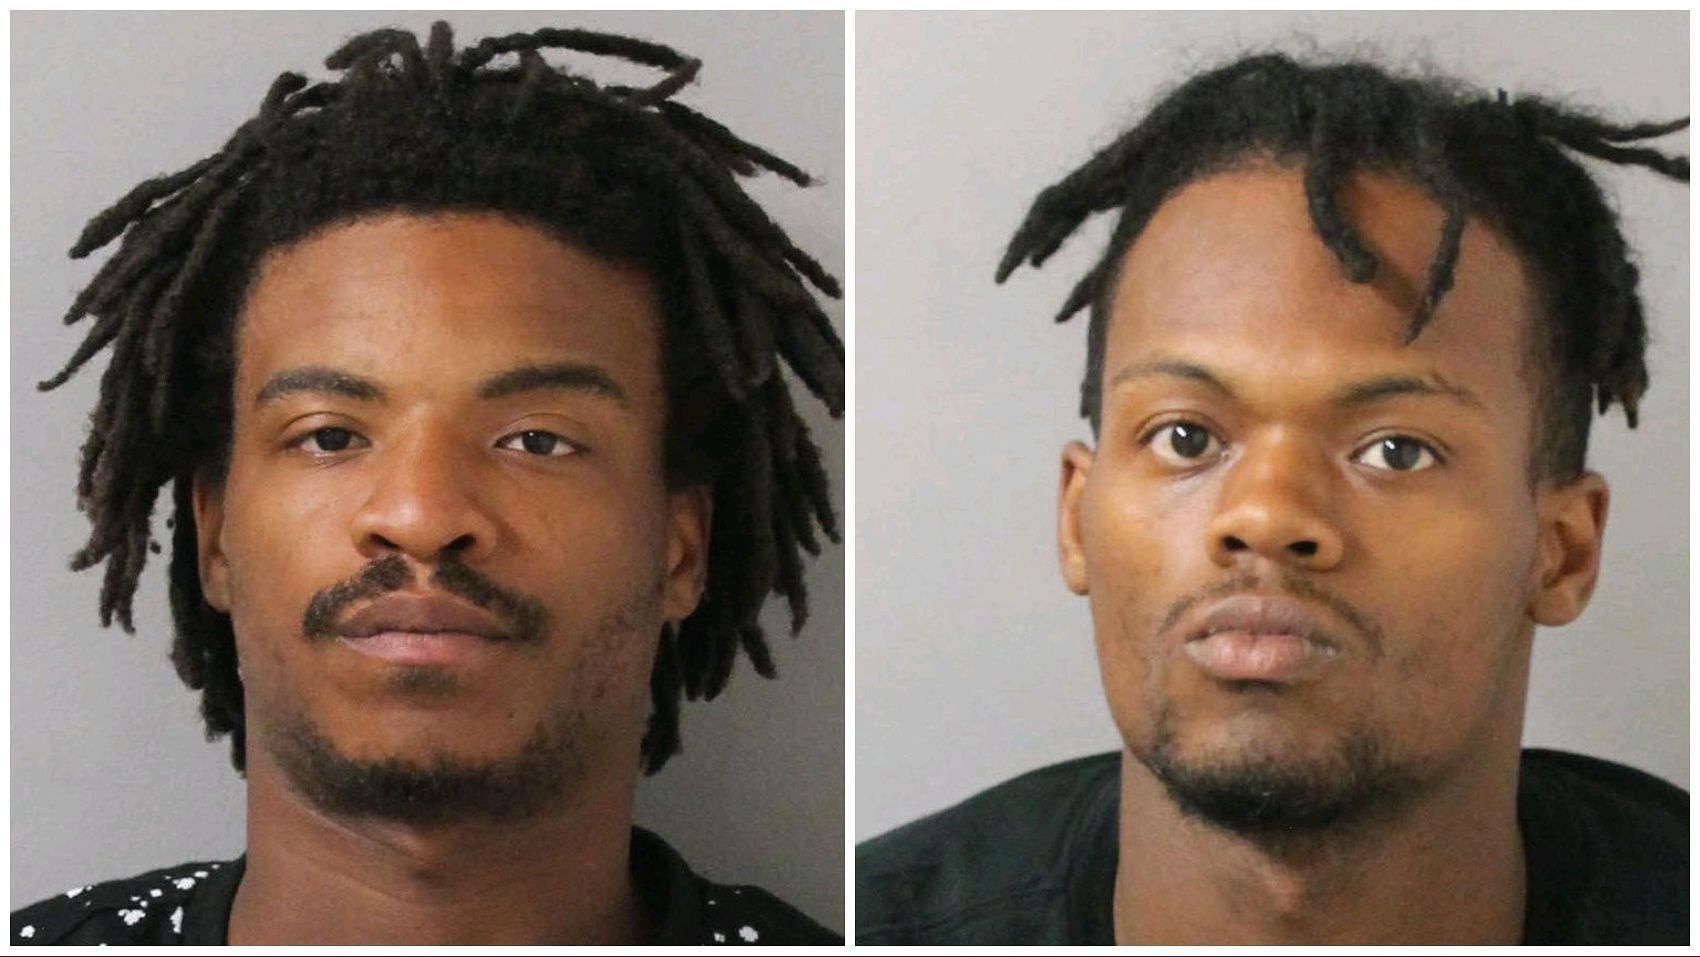 Hakeem Mannie (left) and James Horton (right), the other two robbers convicted in the case (Image via Metro Police Department)